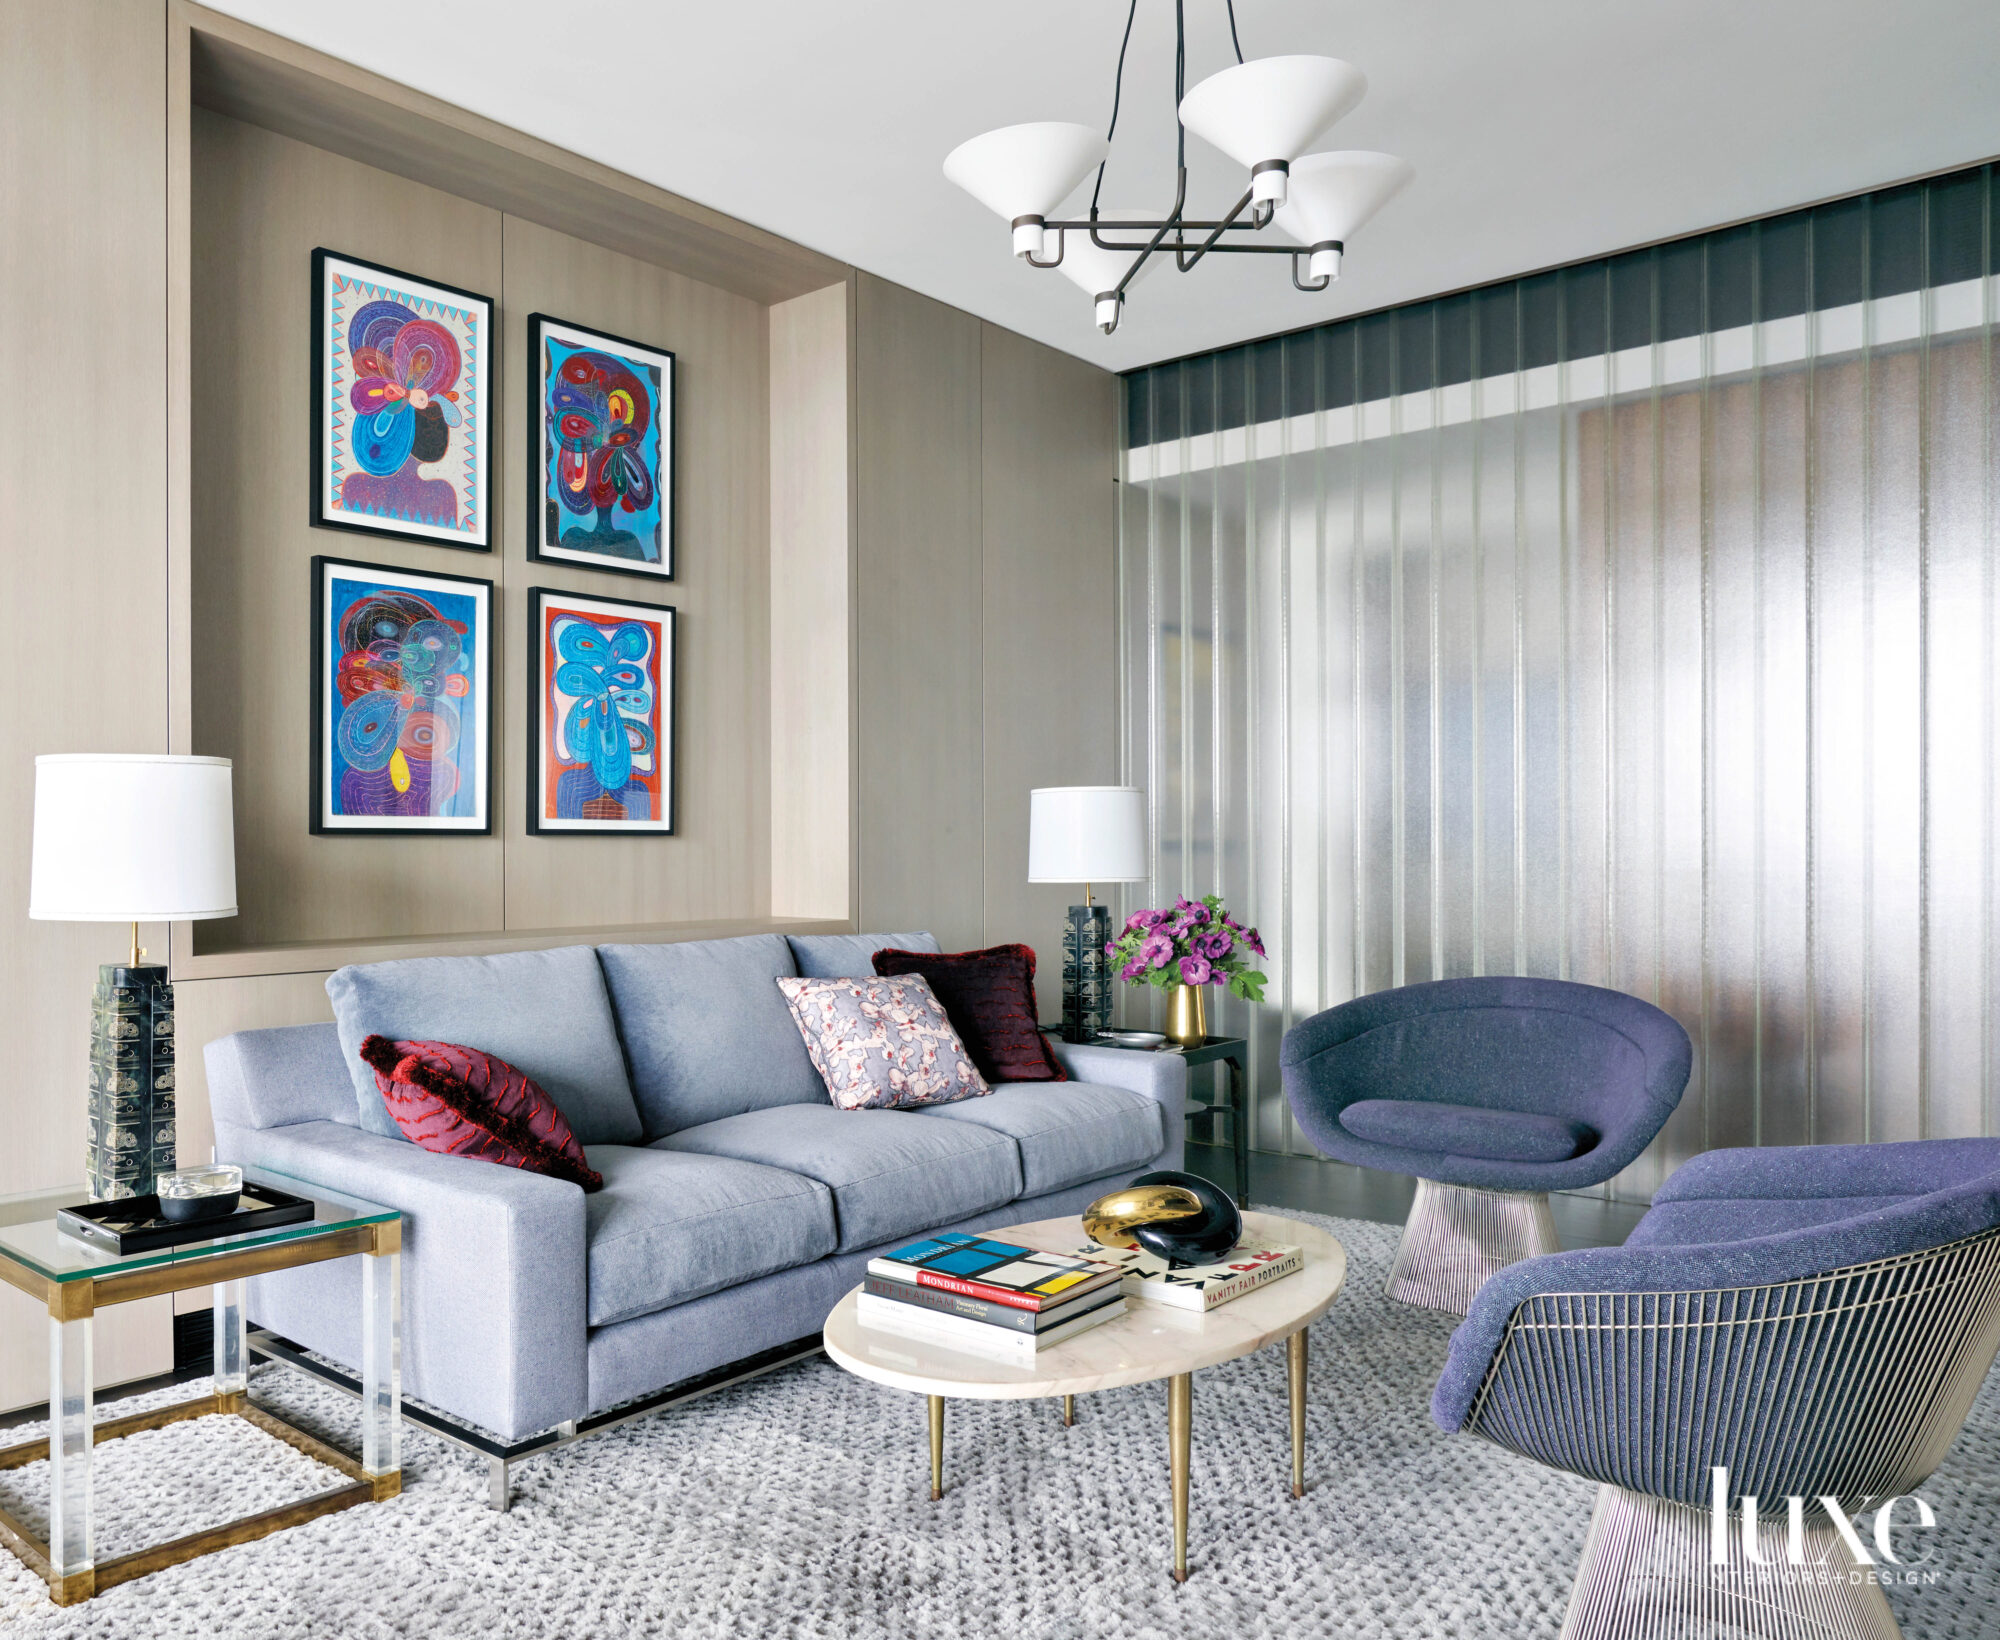 A blue sofa and blue midcentury chairs are set off by colorful paintings on the wall above the sofa.